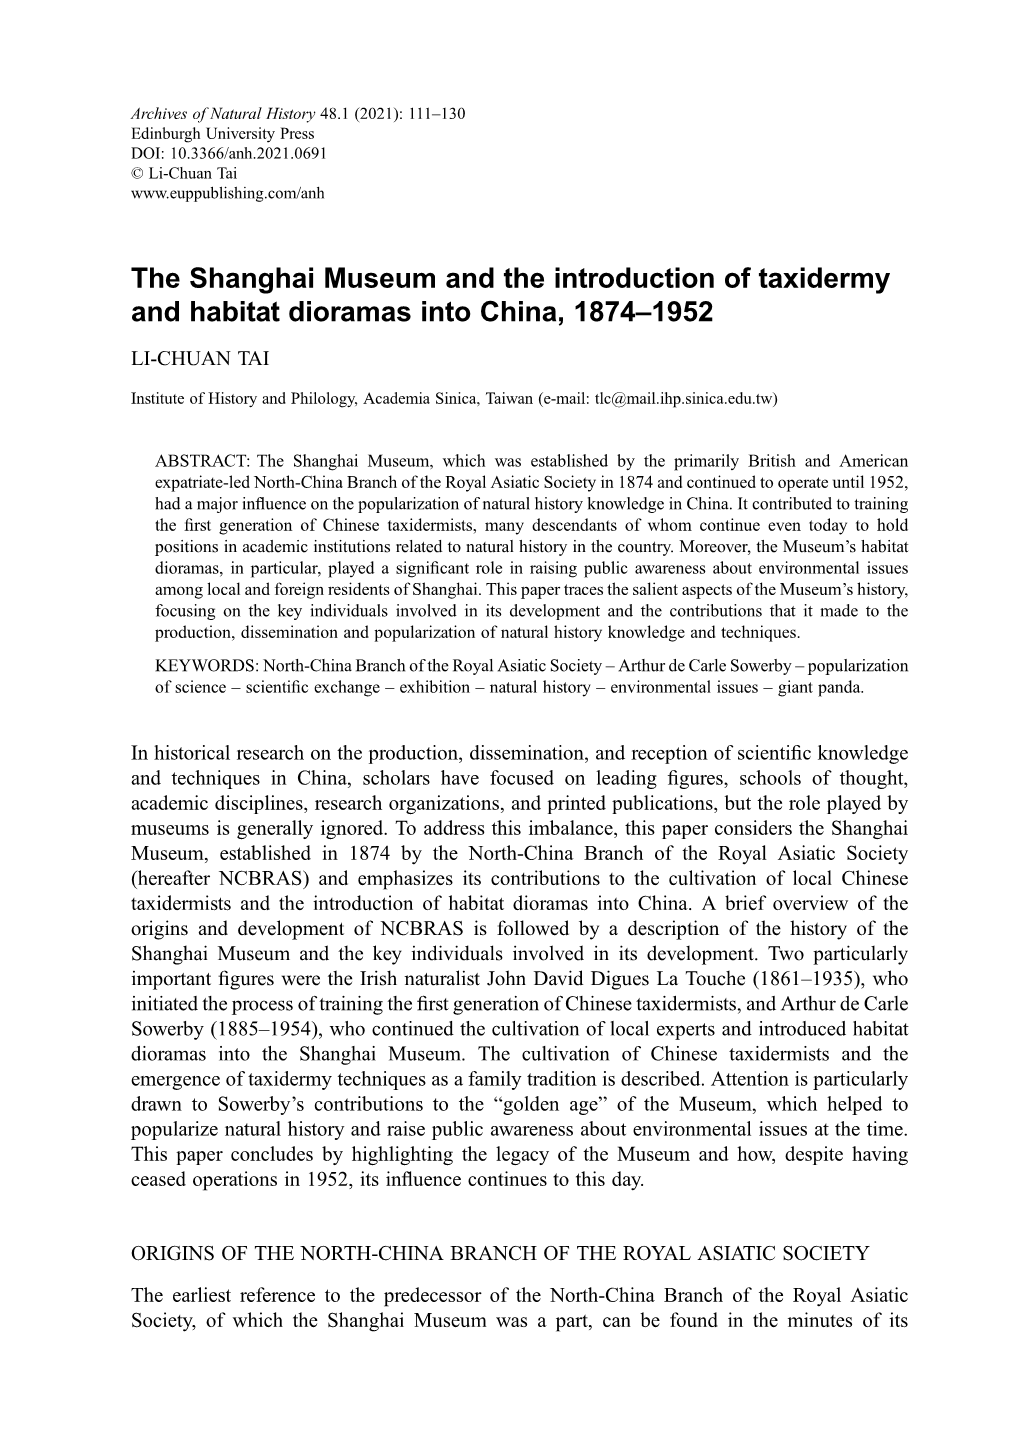 The Shanghai Museum and the Introduction of Taxidermy and Habitat Dioramas Into China, 1874–1952